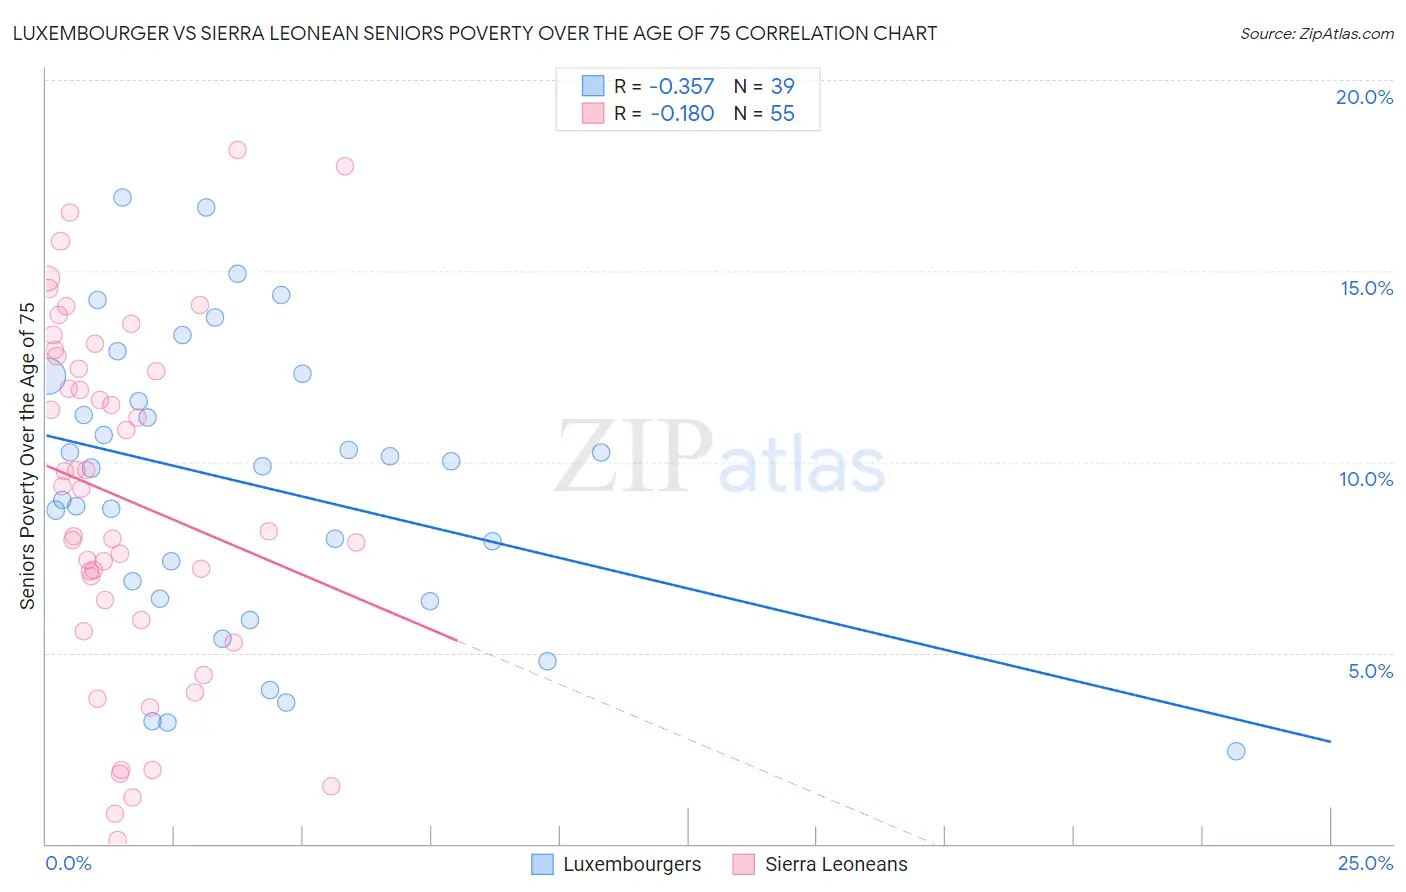 Luxembourger vs Sierra Leonean Seniors Poverty Over the Age of 75